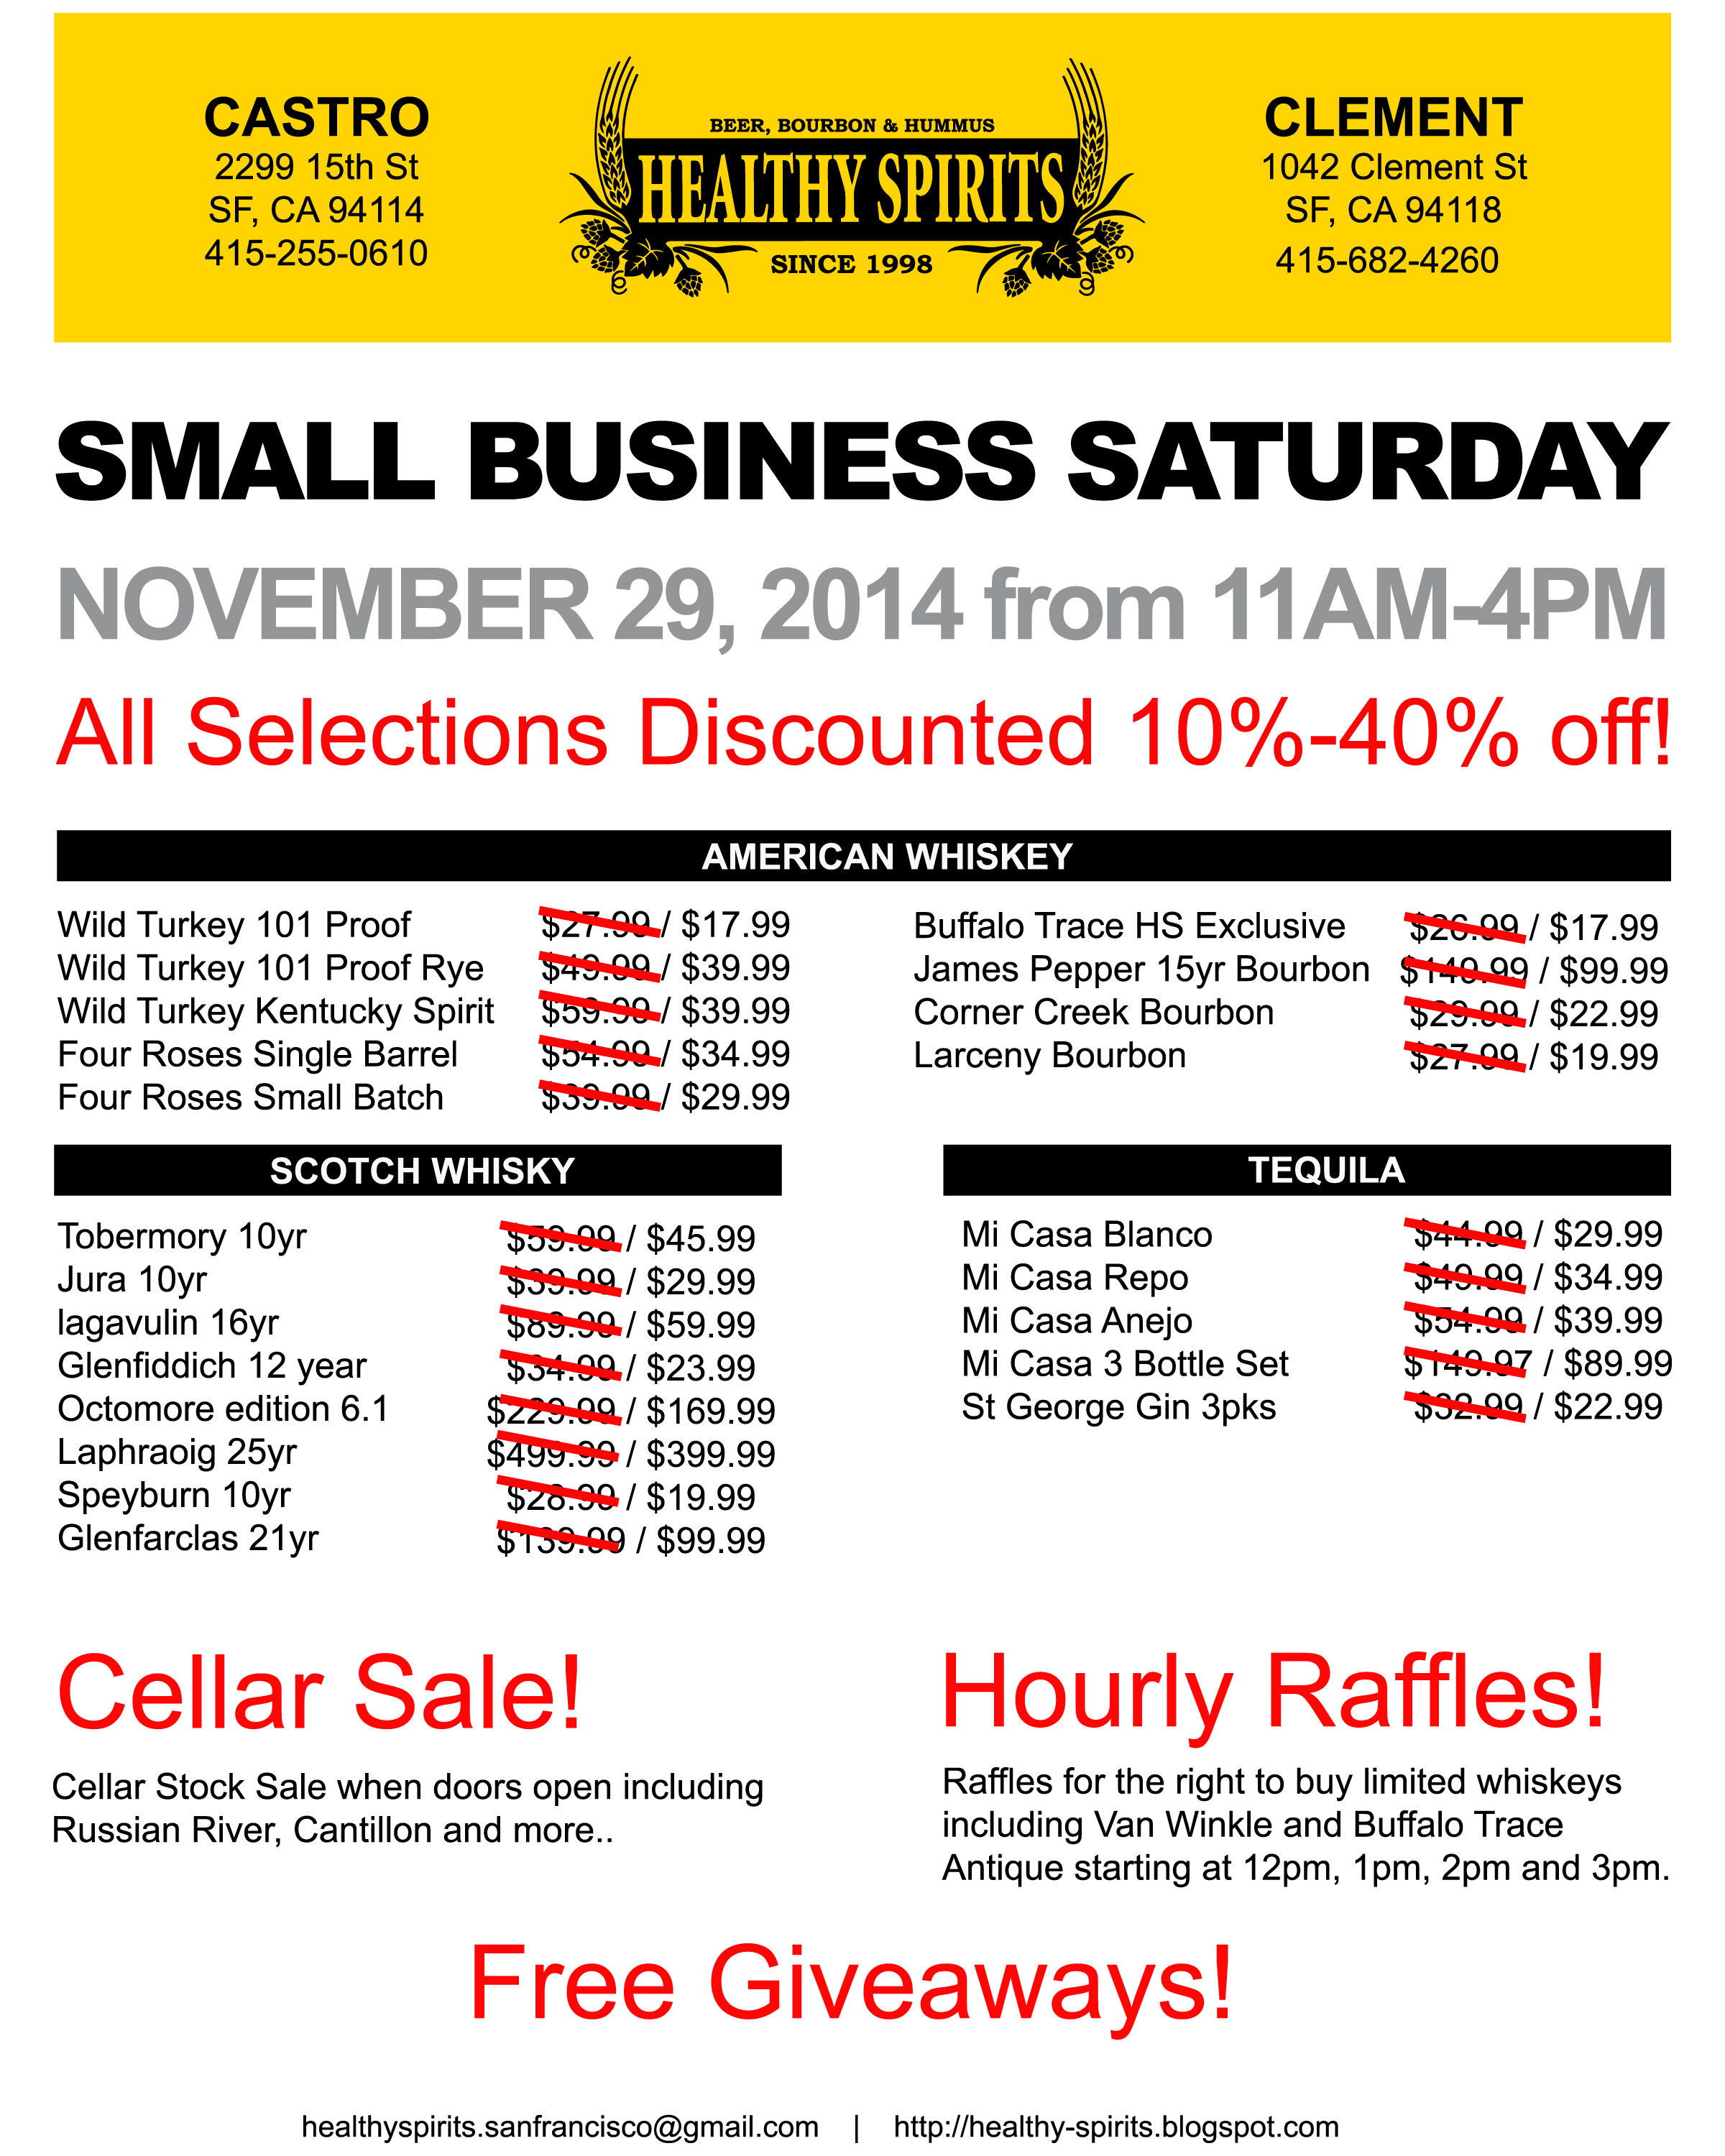 List of Deals for Small Business Saturday